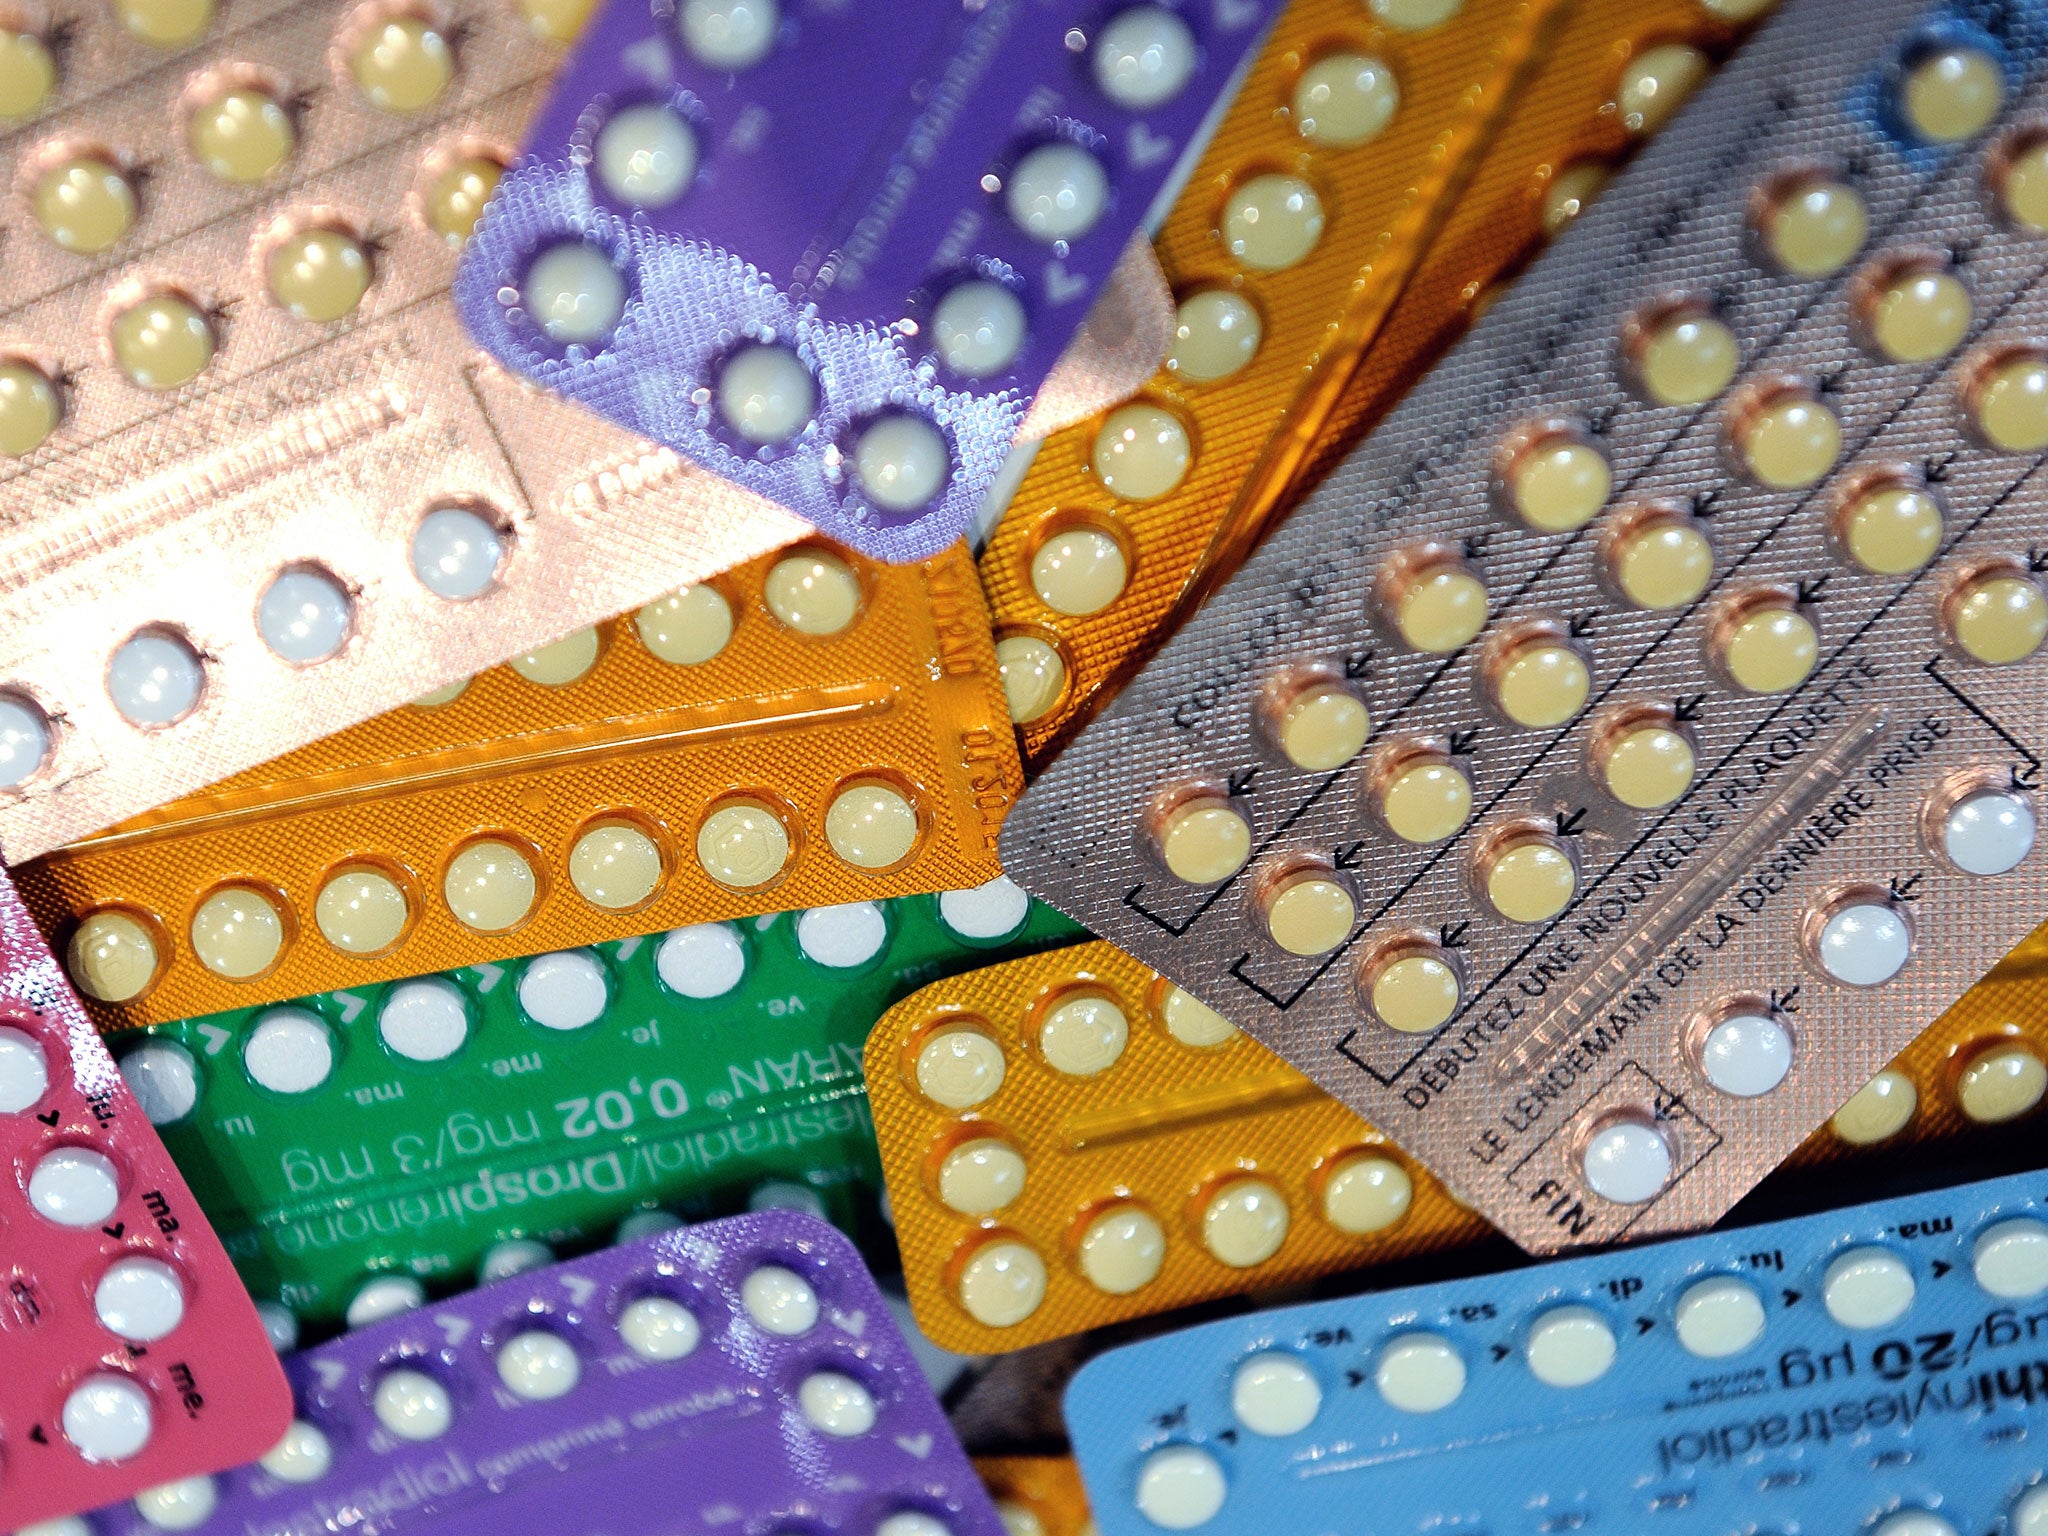 5 per cent of girls aged 12 to 15 are taking the contraceptive pill